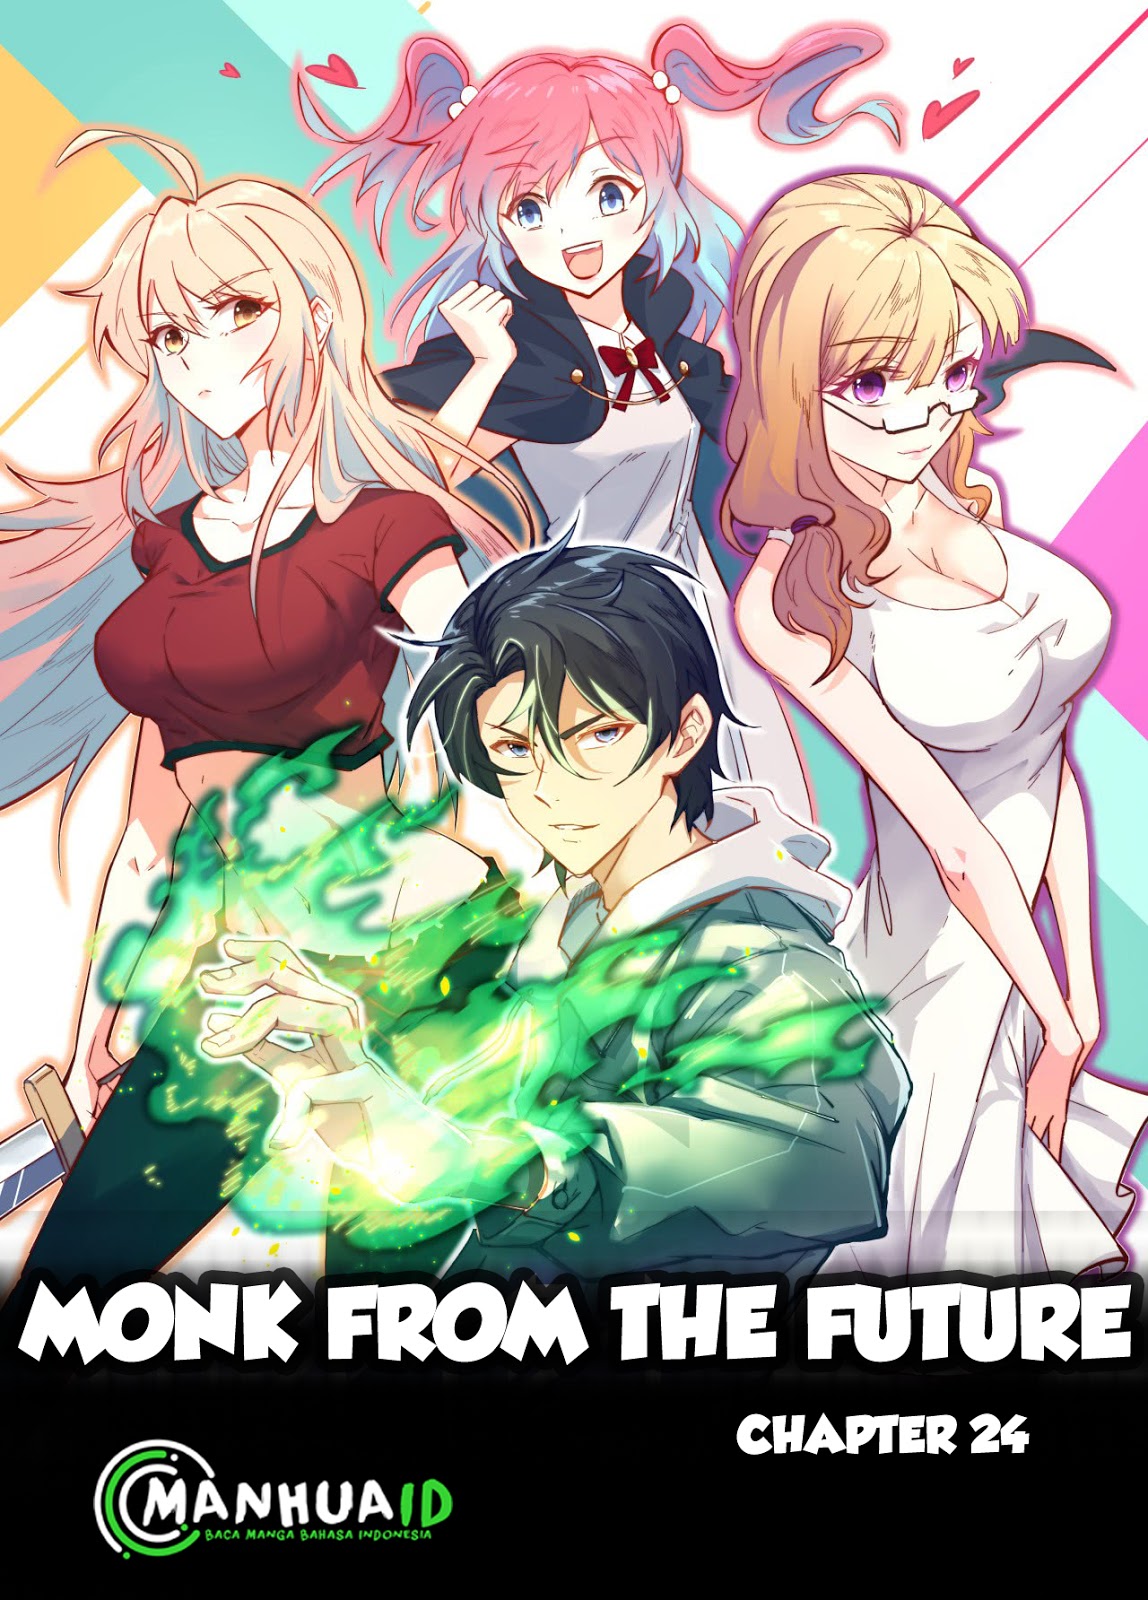 Monk From the Future Chapter 24